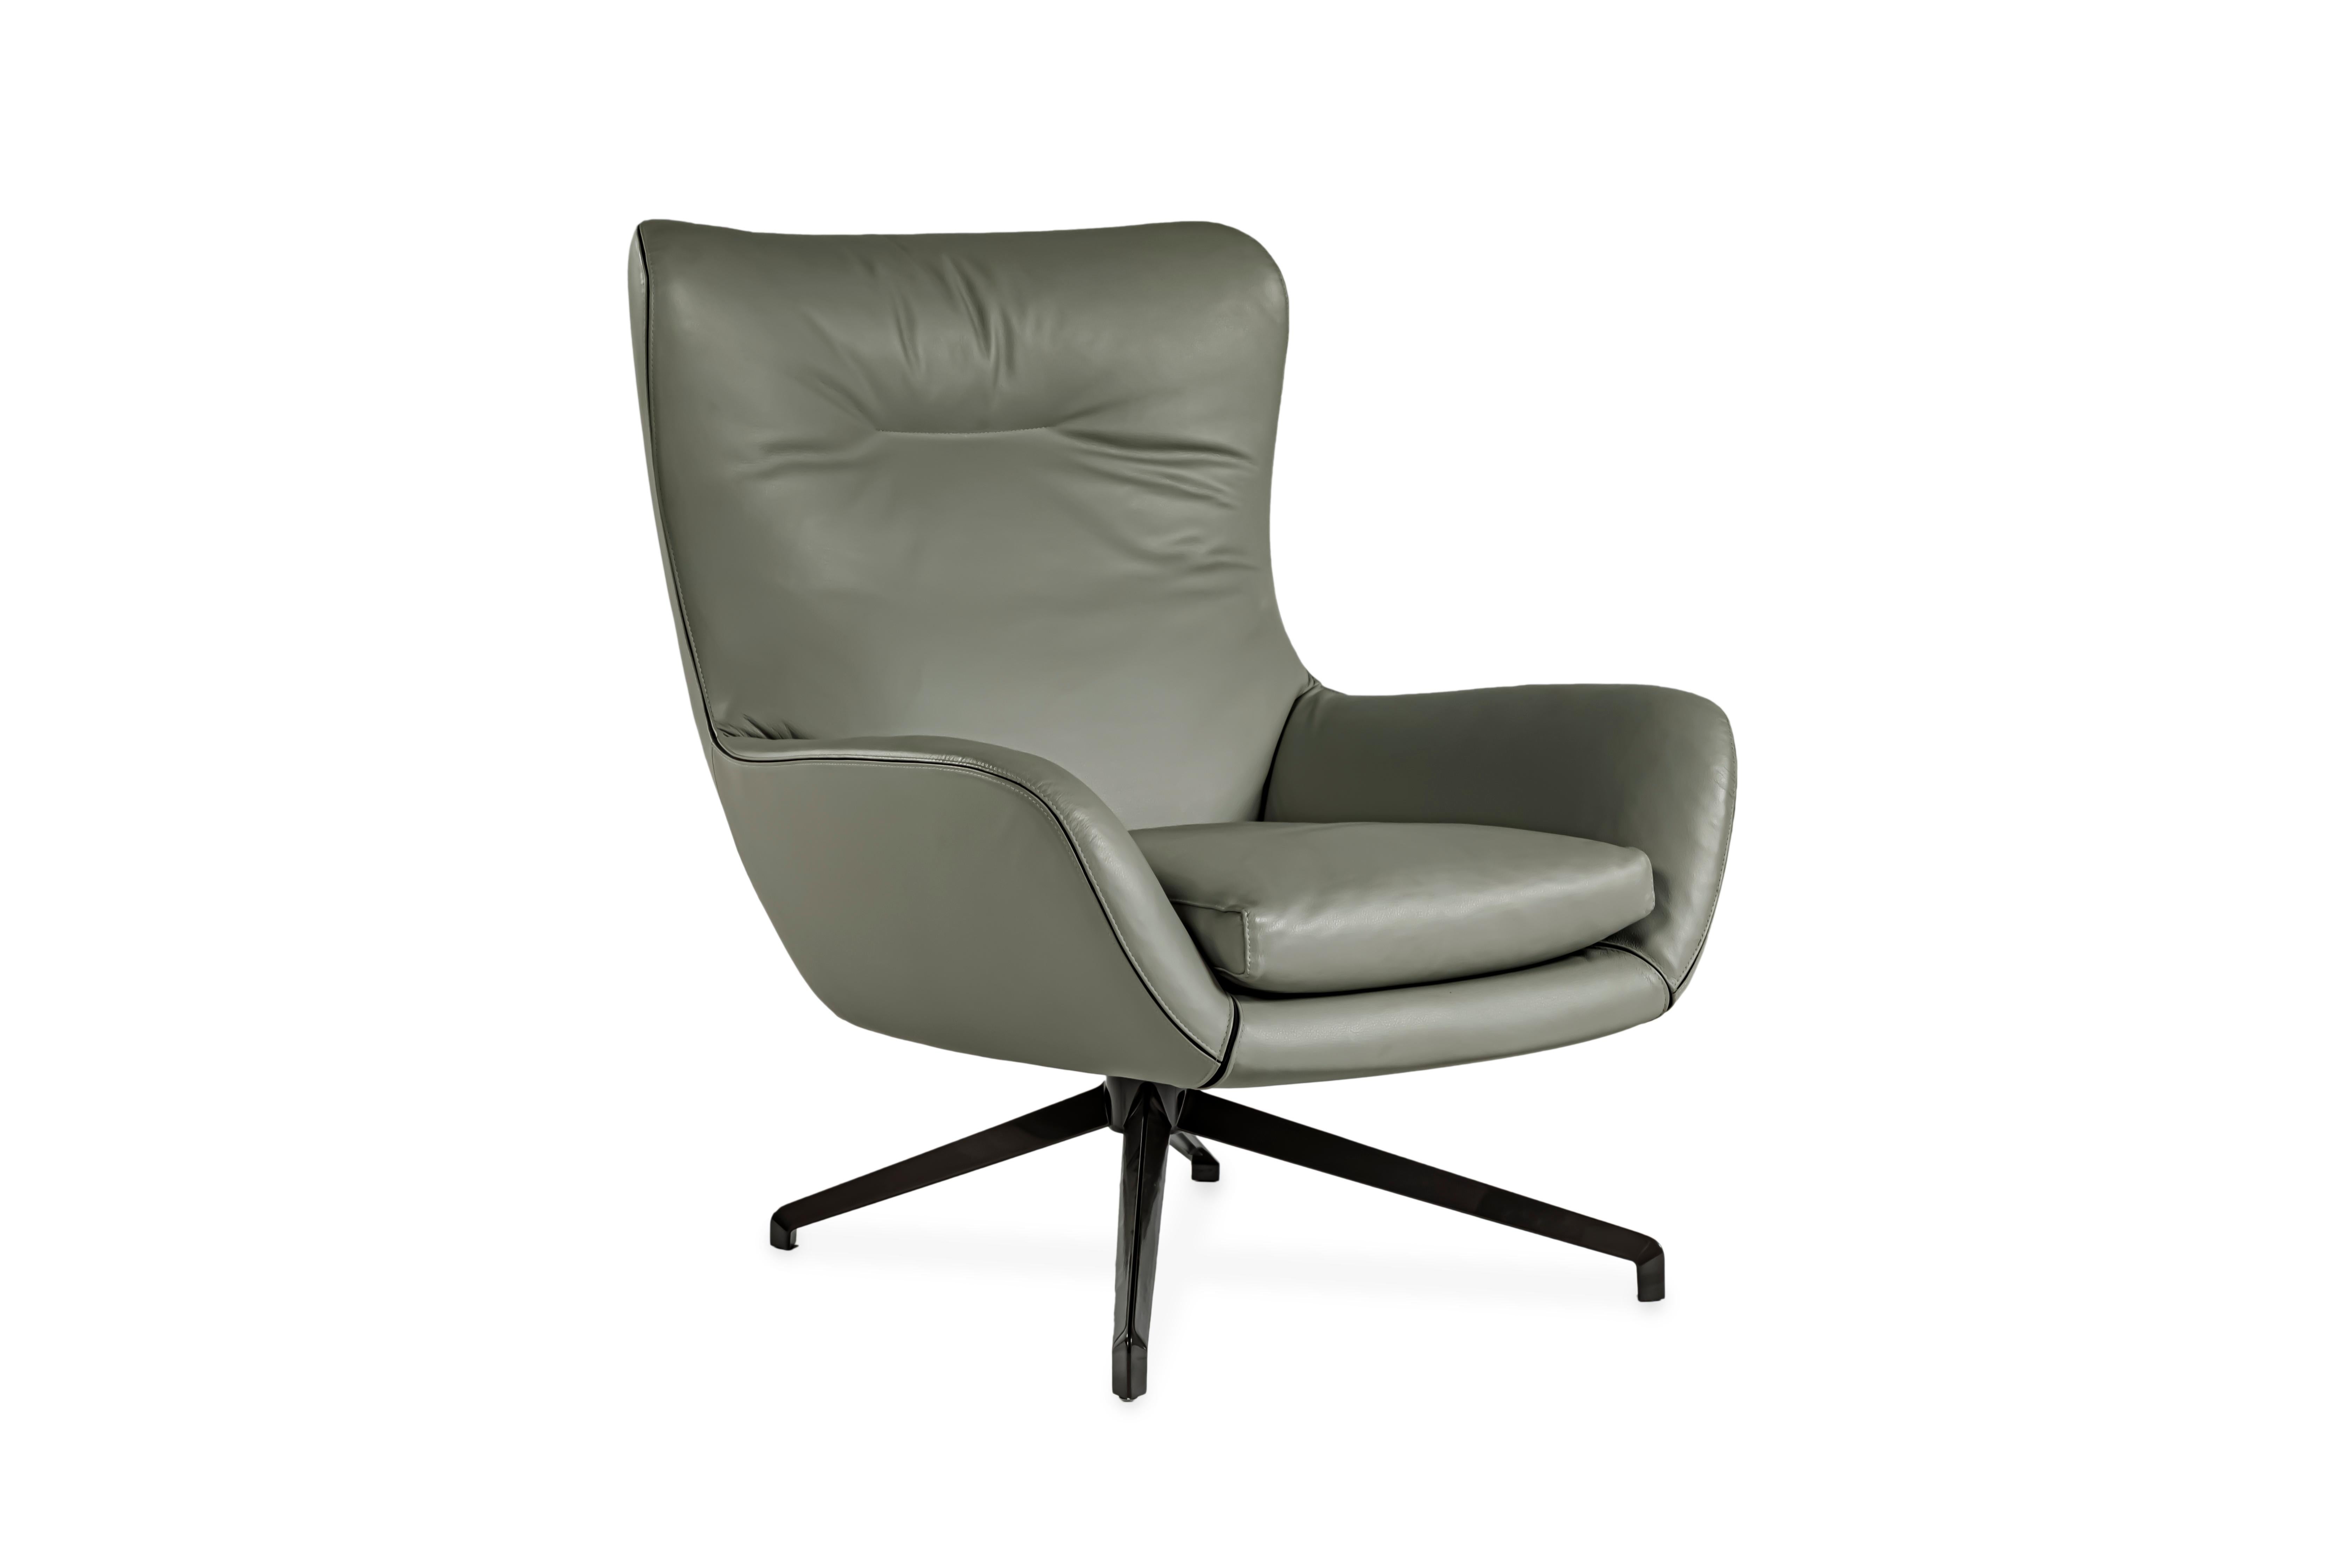 A winged lounge chair upholstered in gray leather, with black fabric piping. The armchair sits on an aluminum base with a pewter finish. 

